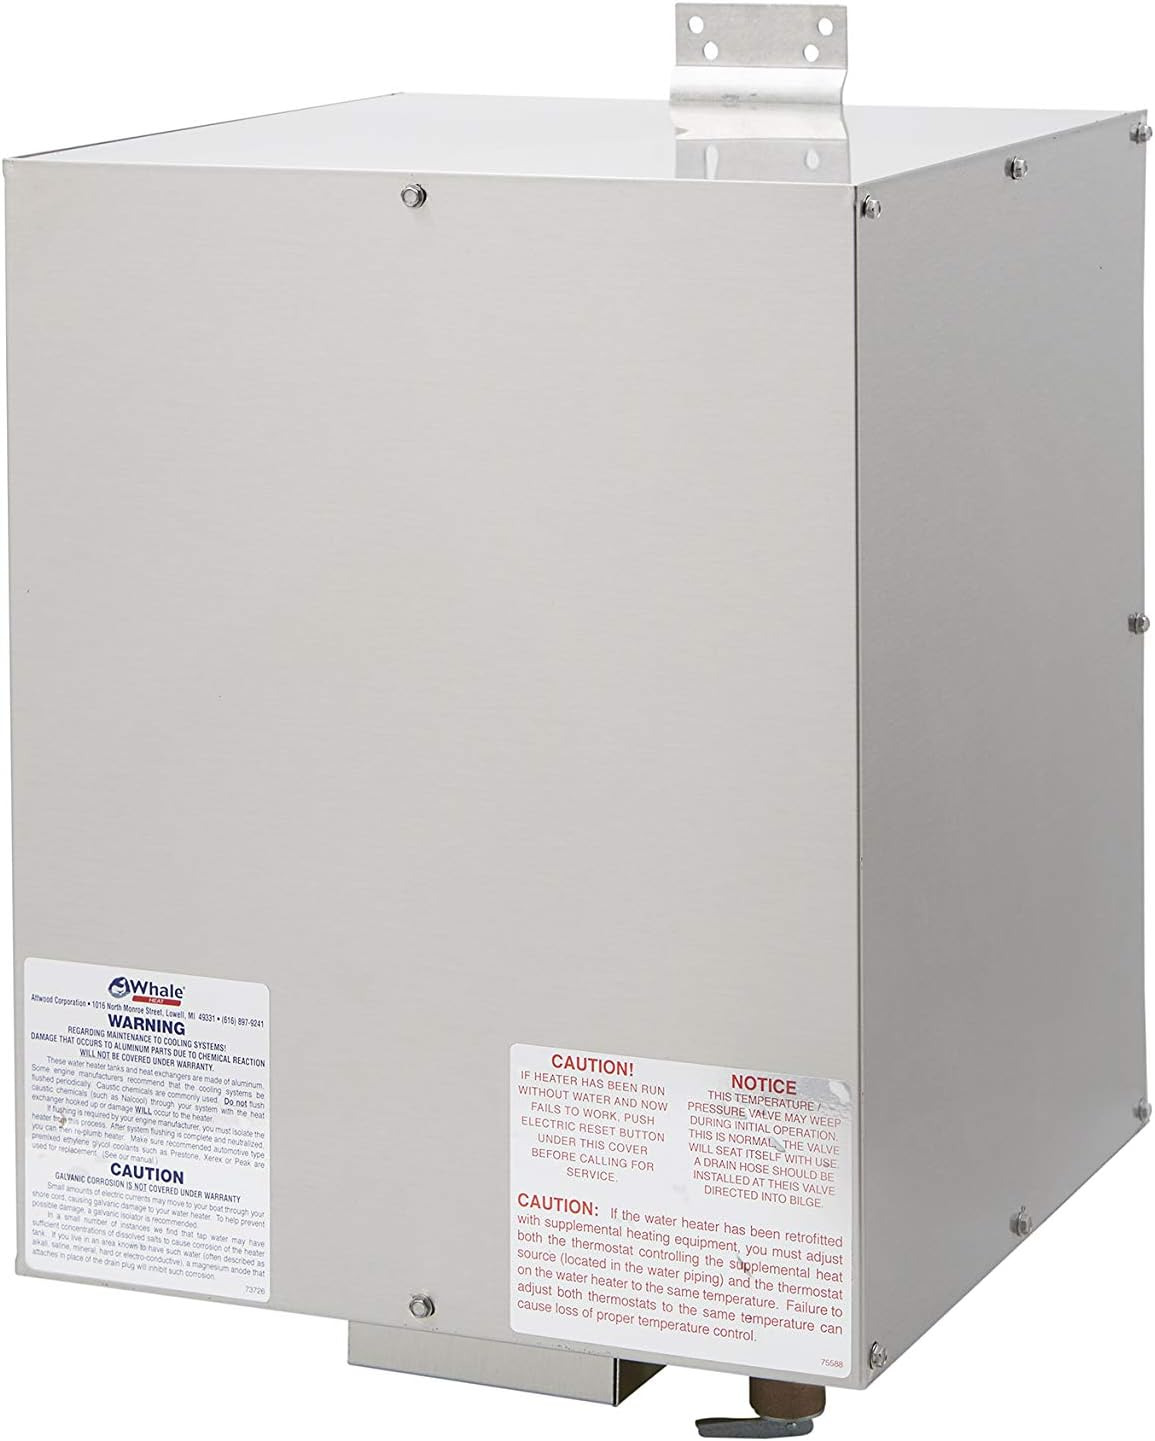 F700 Water Heater, 6 Gal., 120V, 100 PSI, Horizontal Mount, Double-Wall Front He